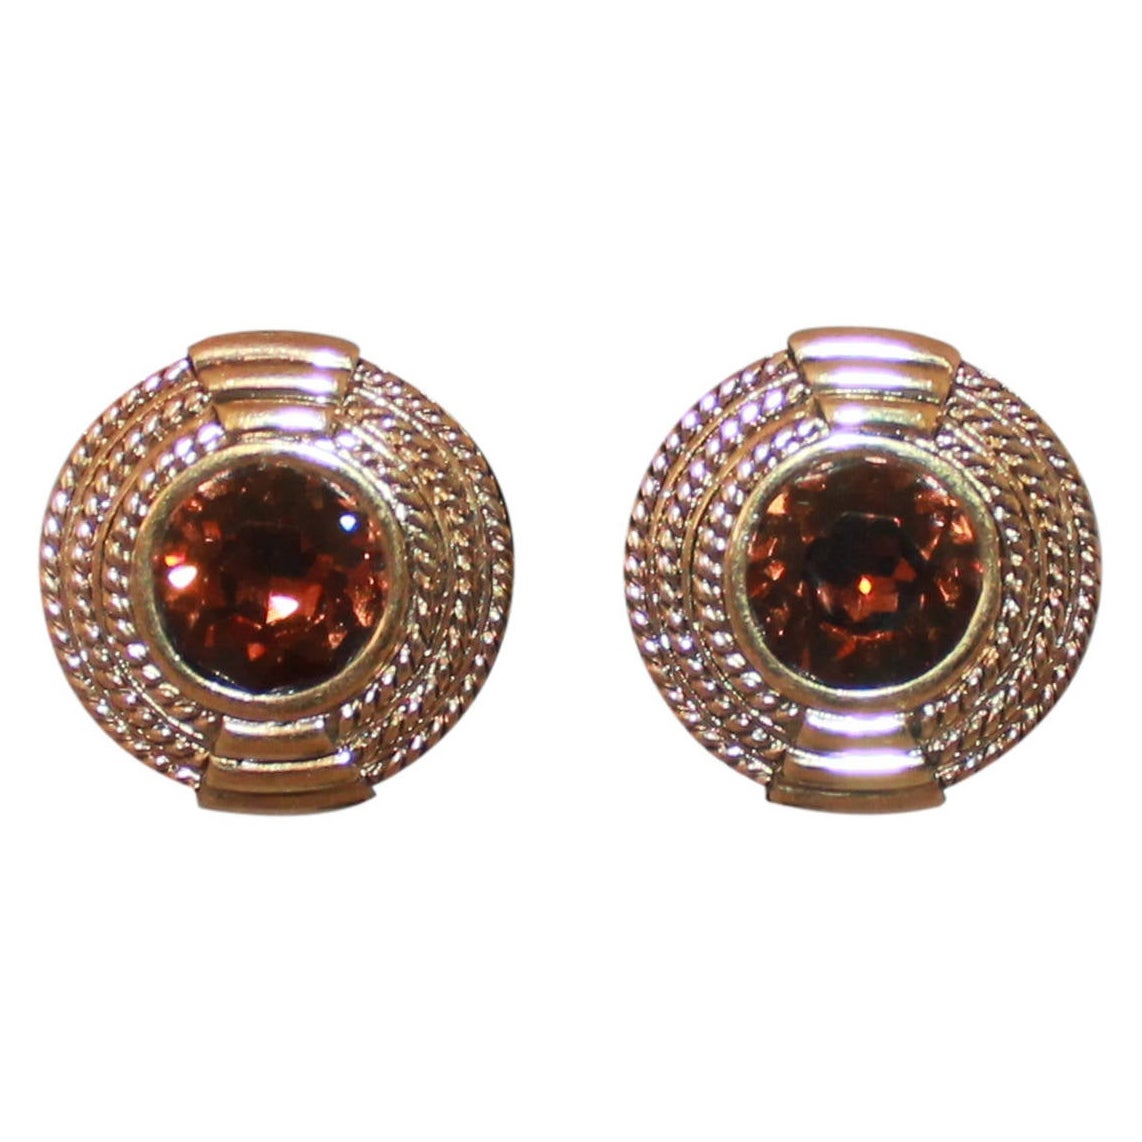 Vintage 1990s Ciner Gold Tone and Amber Tone Round Clip On Earrings